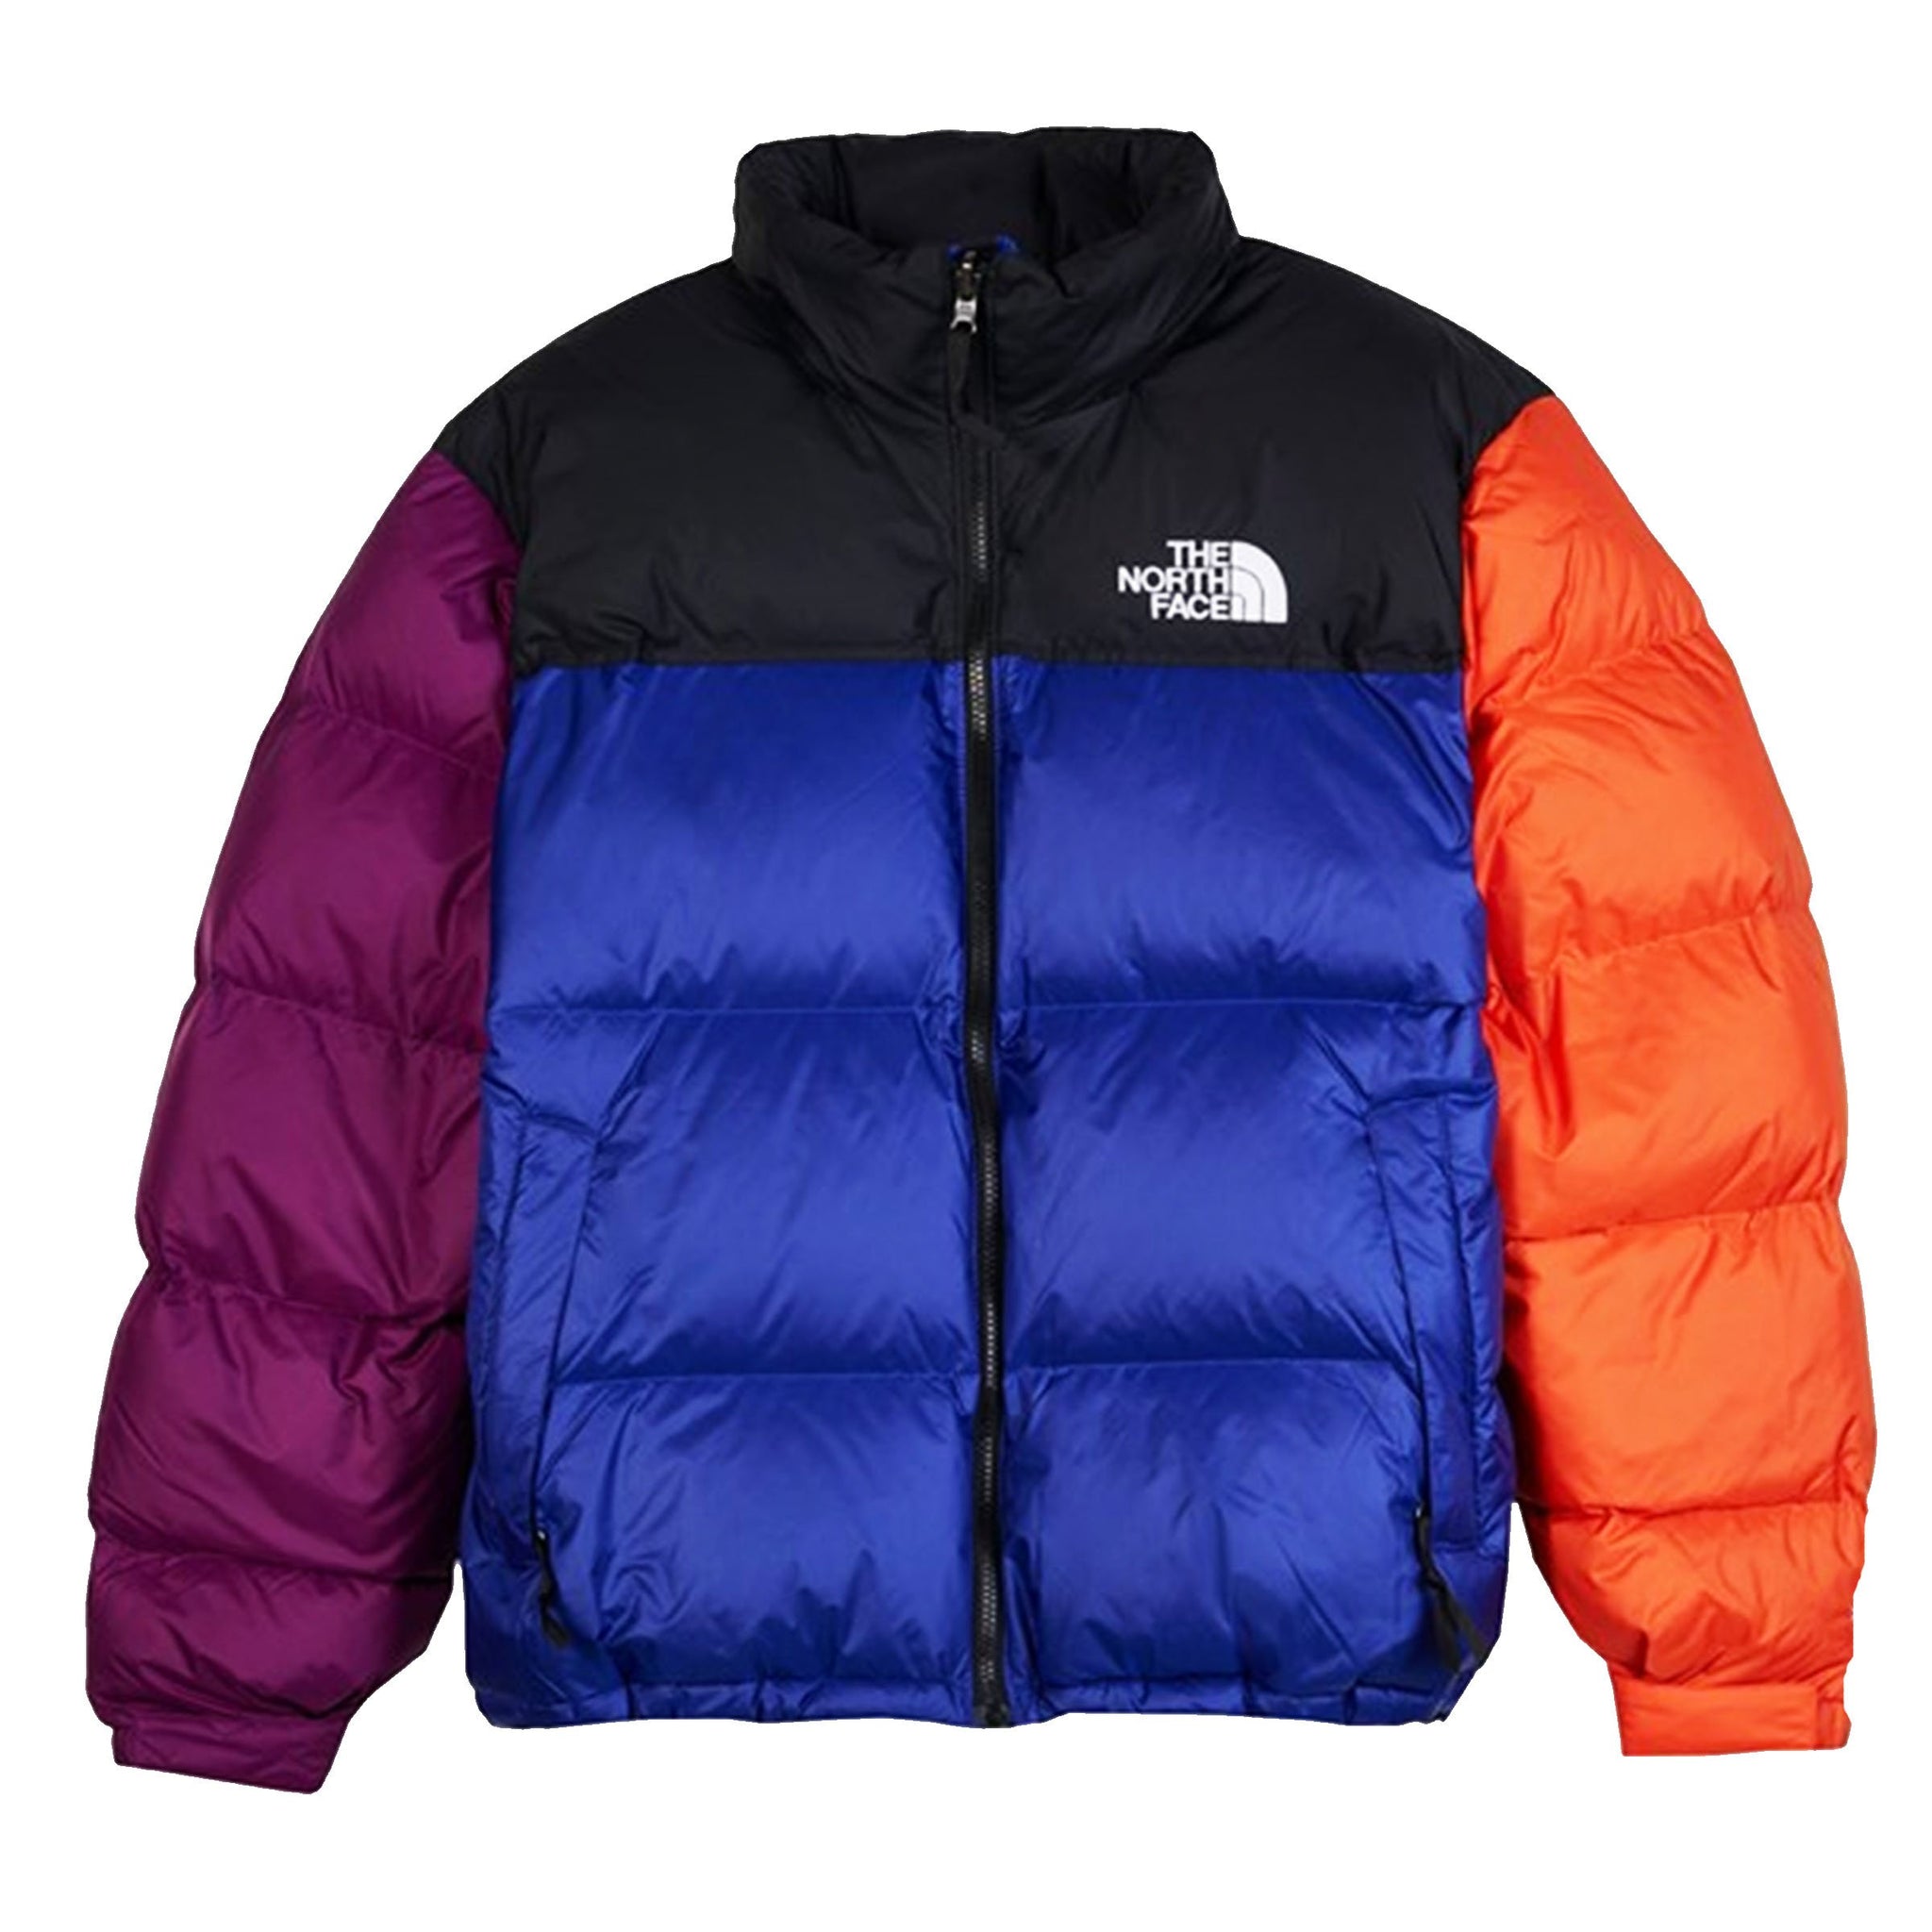 the north face 700 jacket